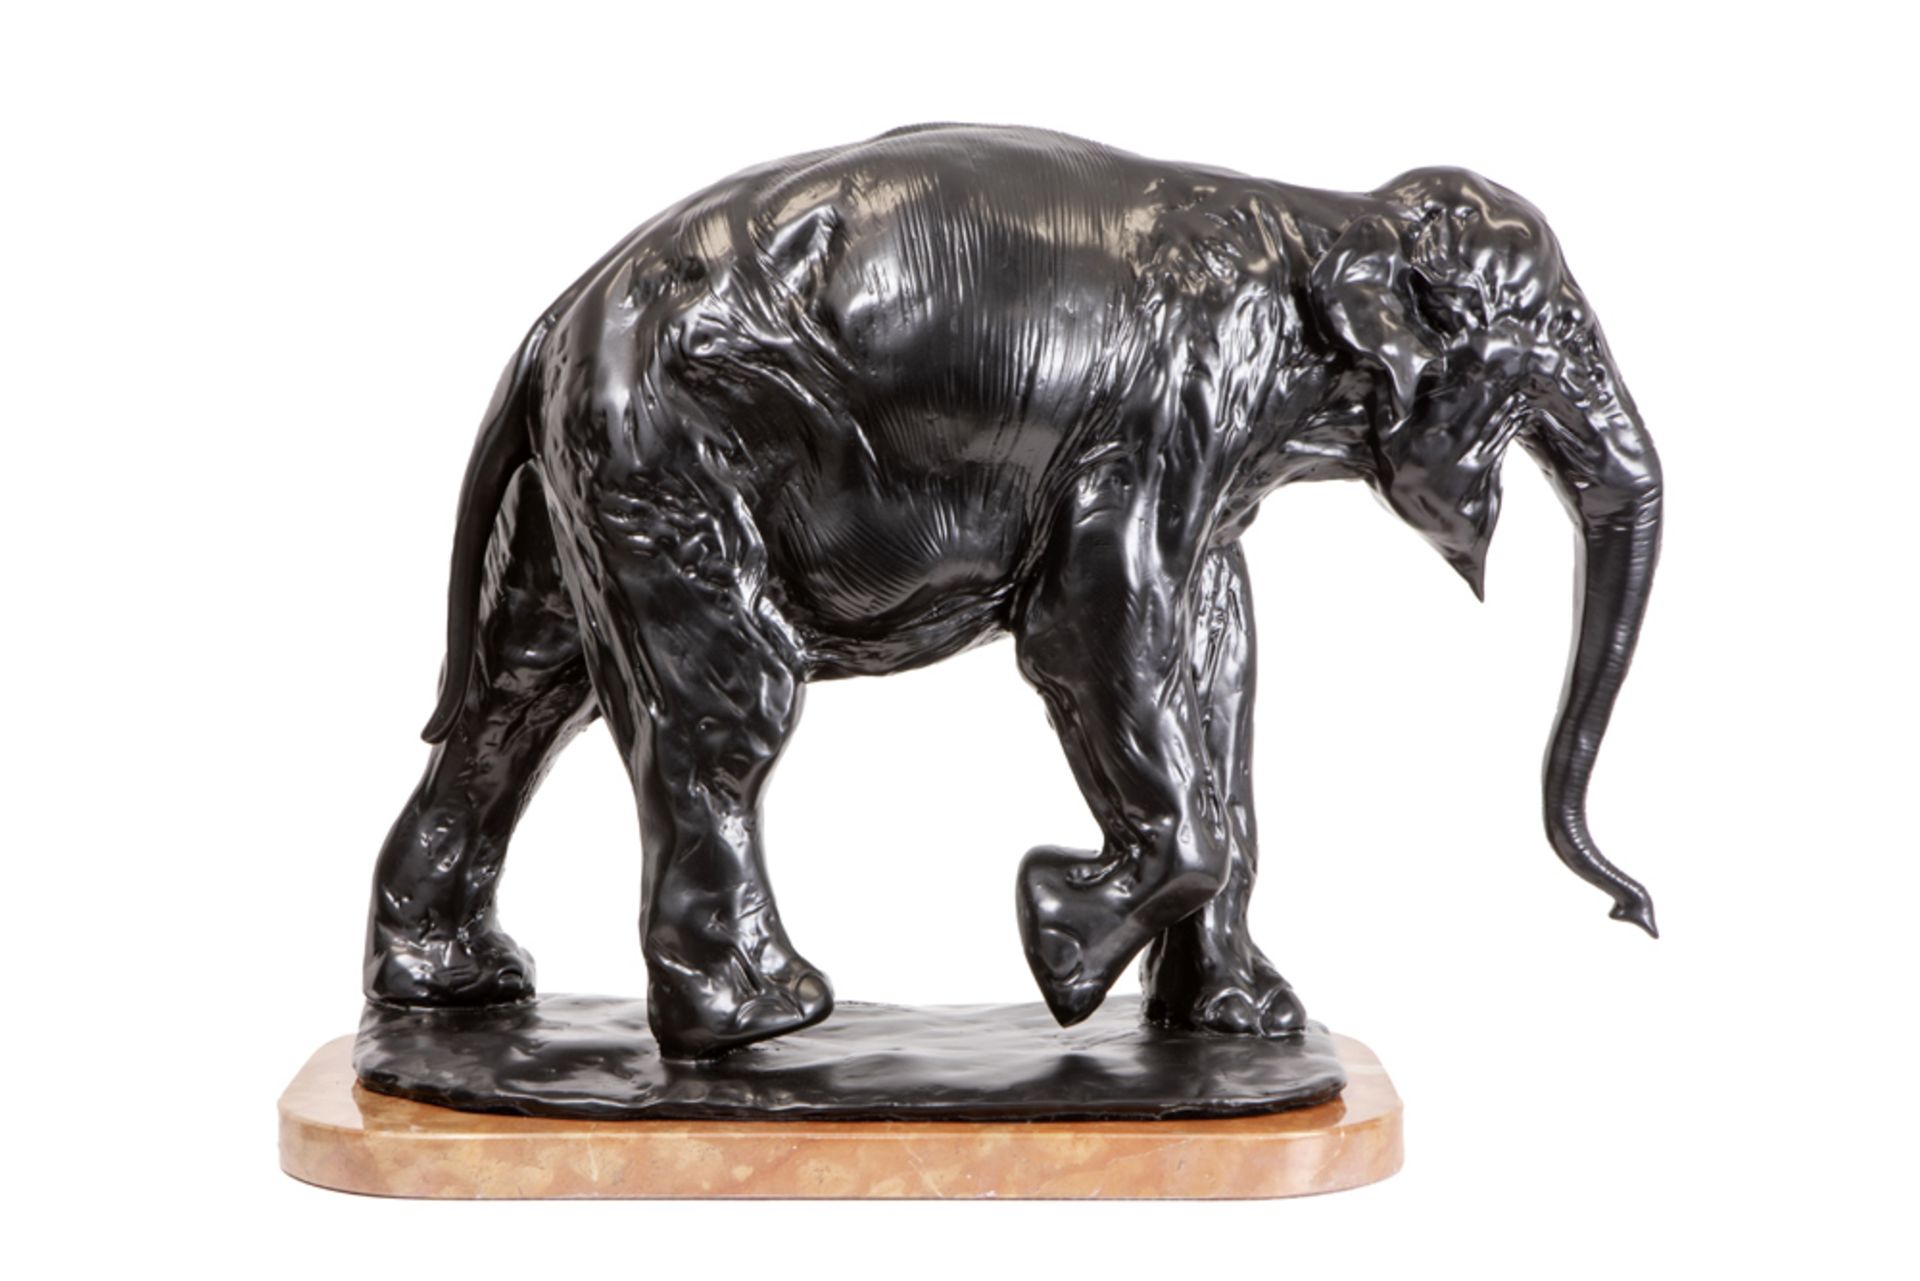 Rembrandt Bugatti "Walking Elephant" sculpture in bronze - signed posthumous cast by Ebano - with